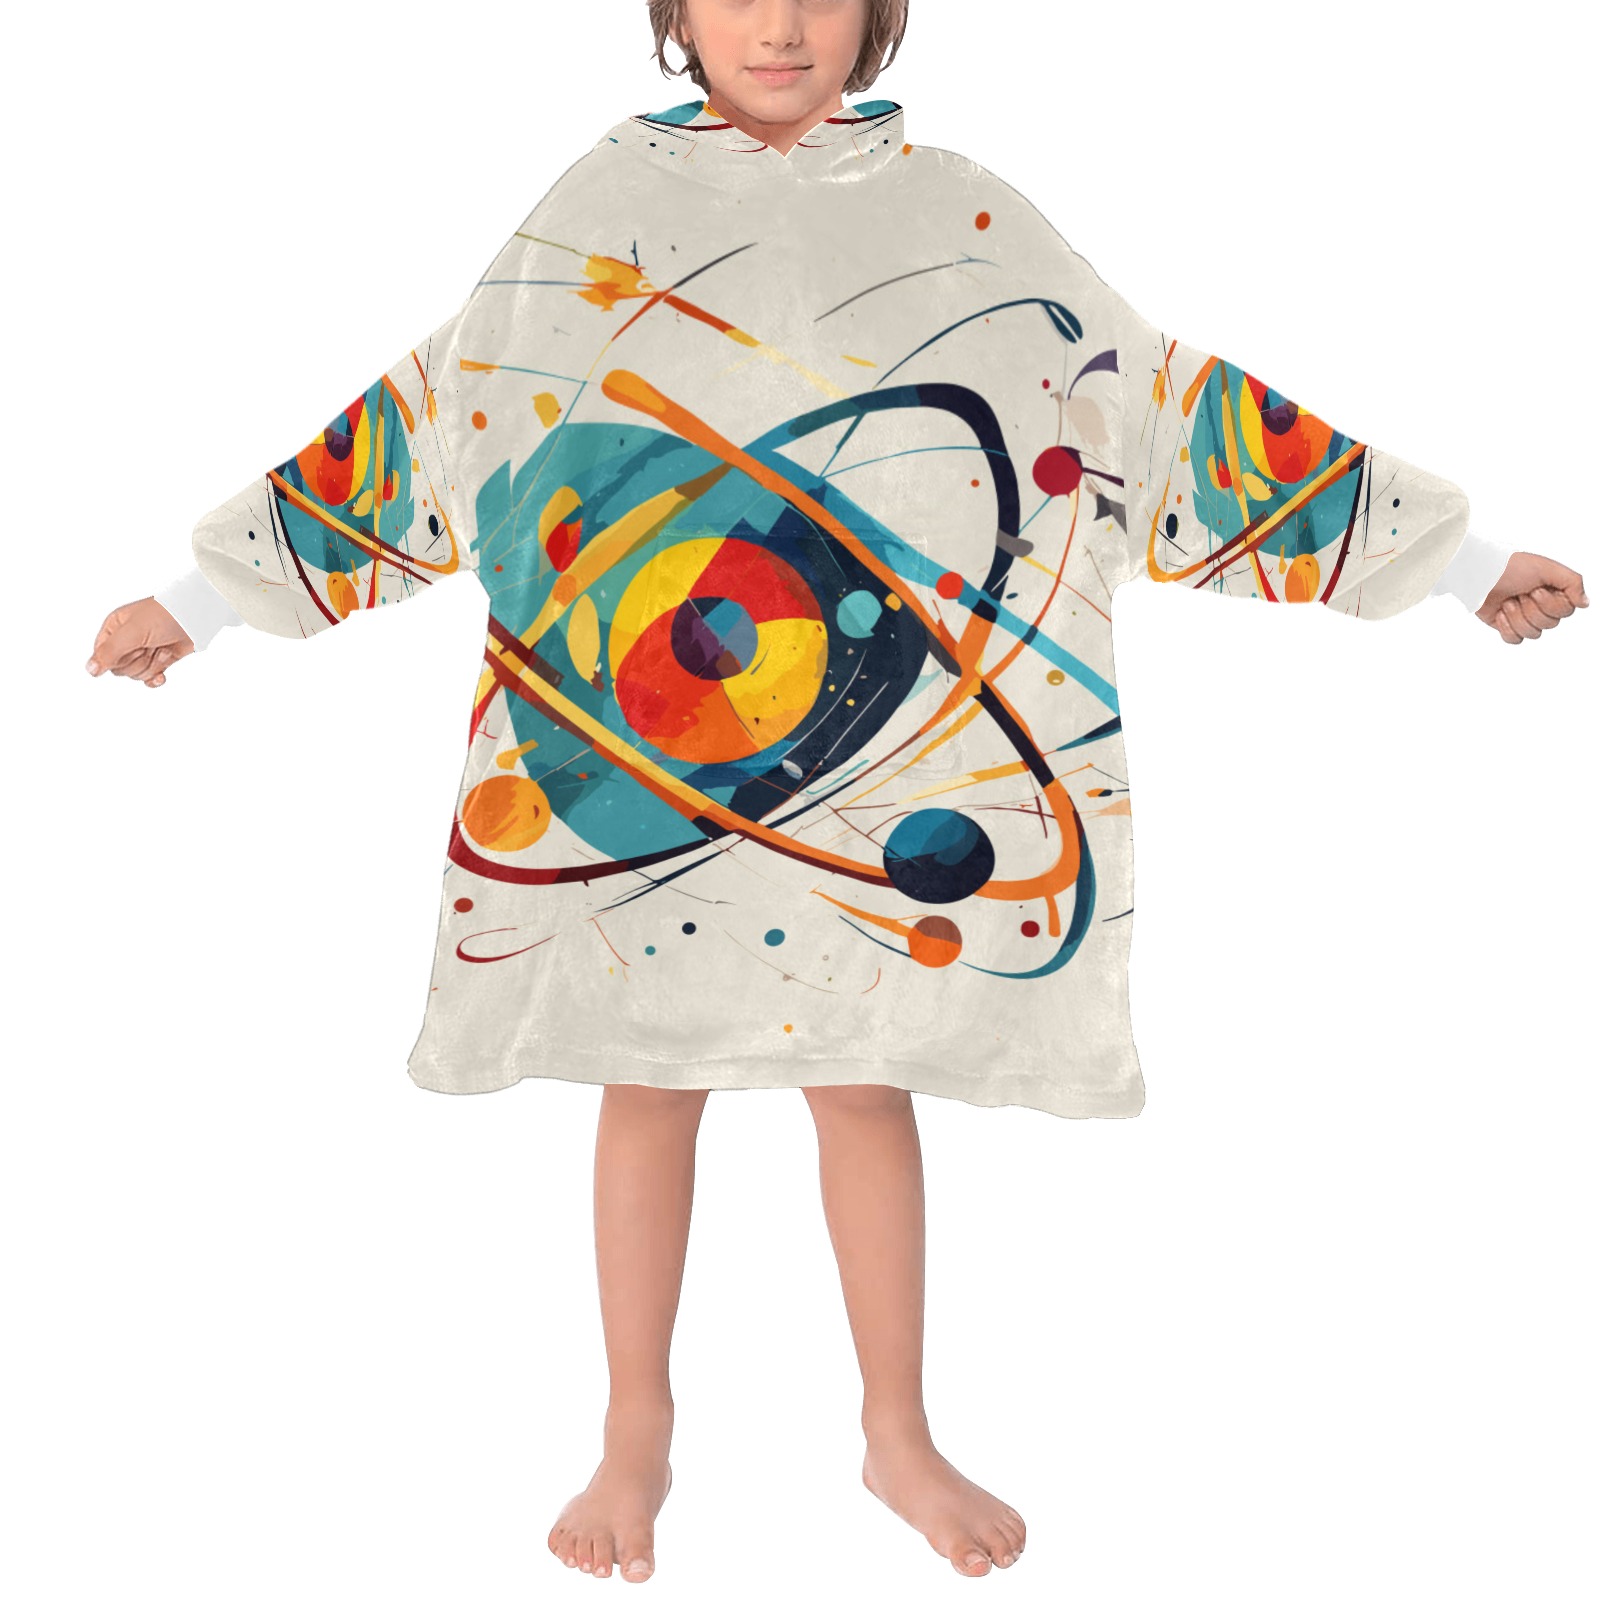 The structure of an atom scientific abstract art Blanket Hoodie for Kids